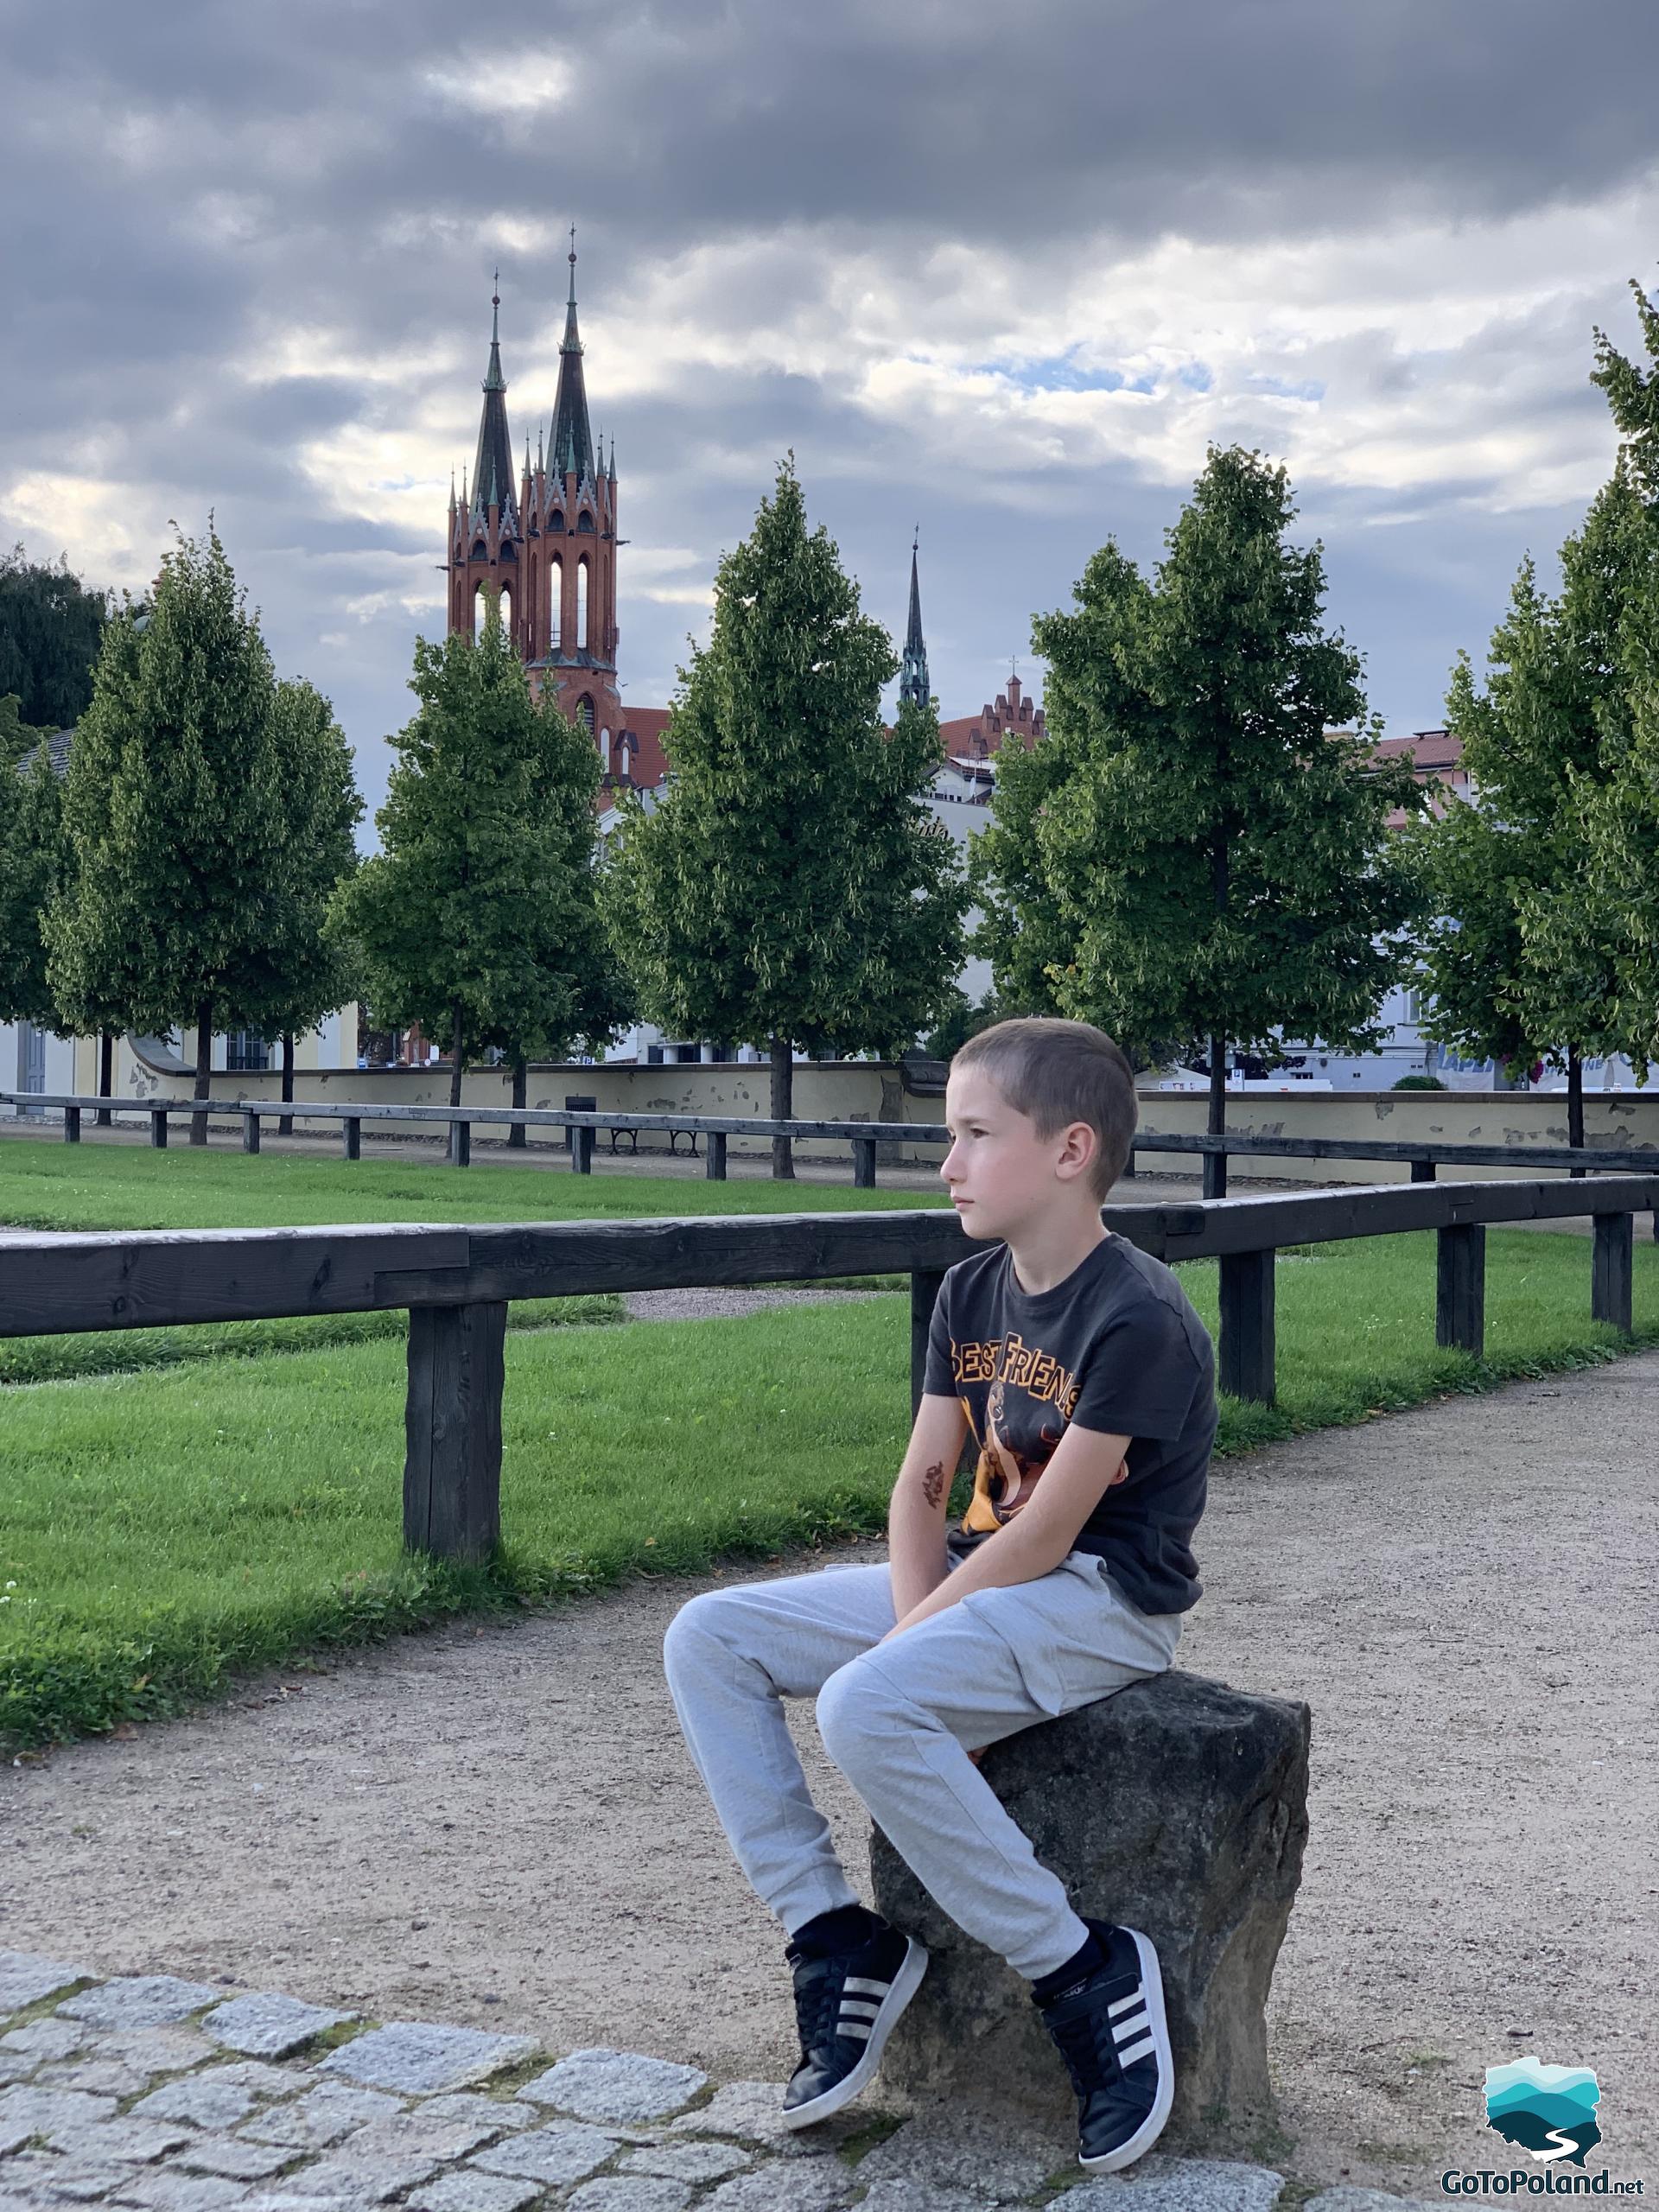 a boy is sitting on a stone, in the background trees and a church